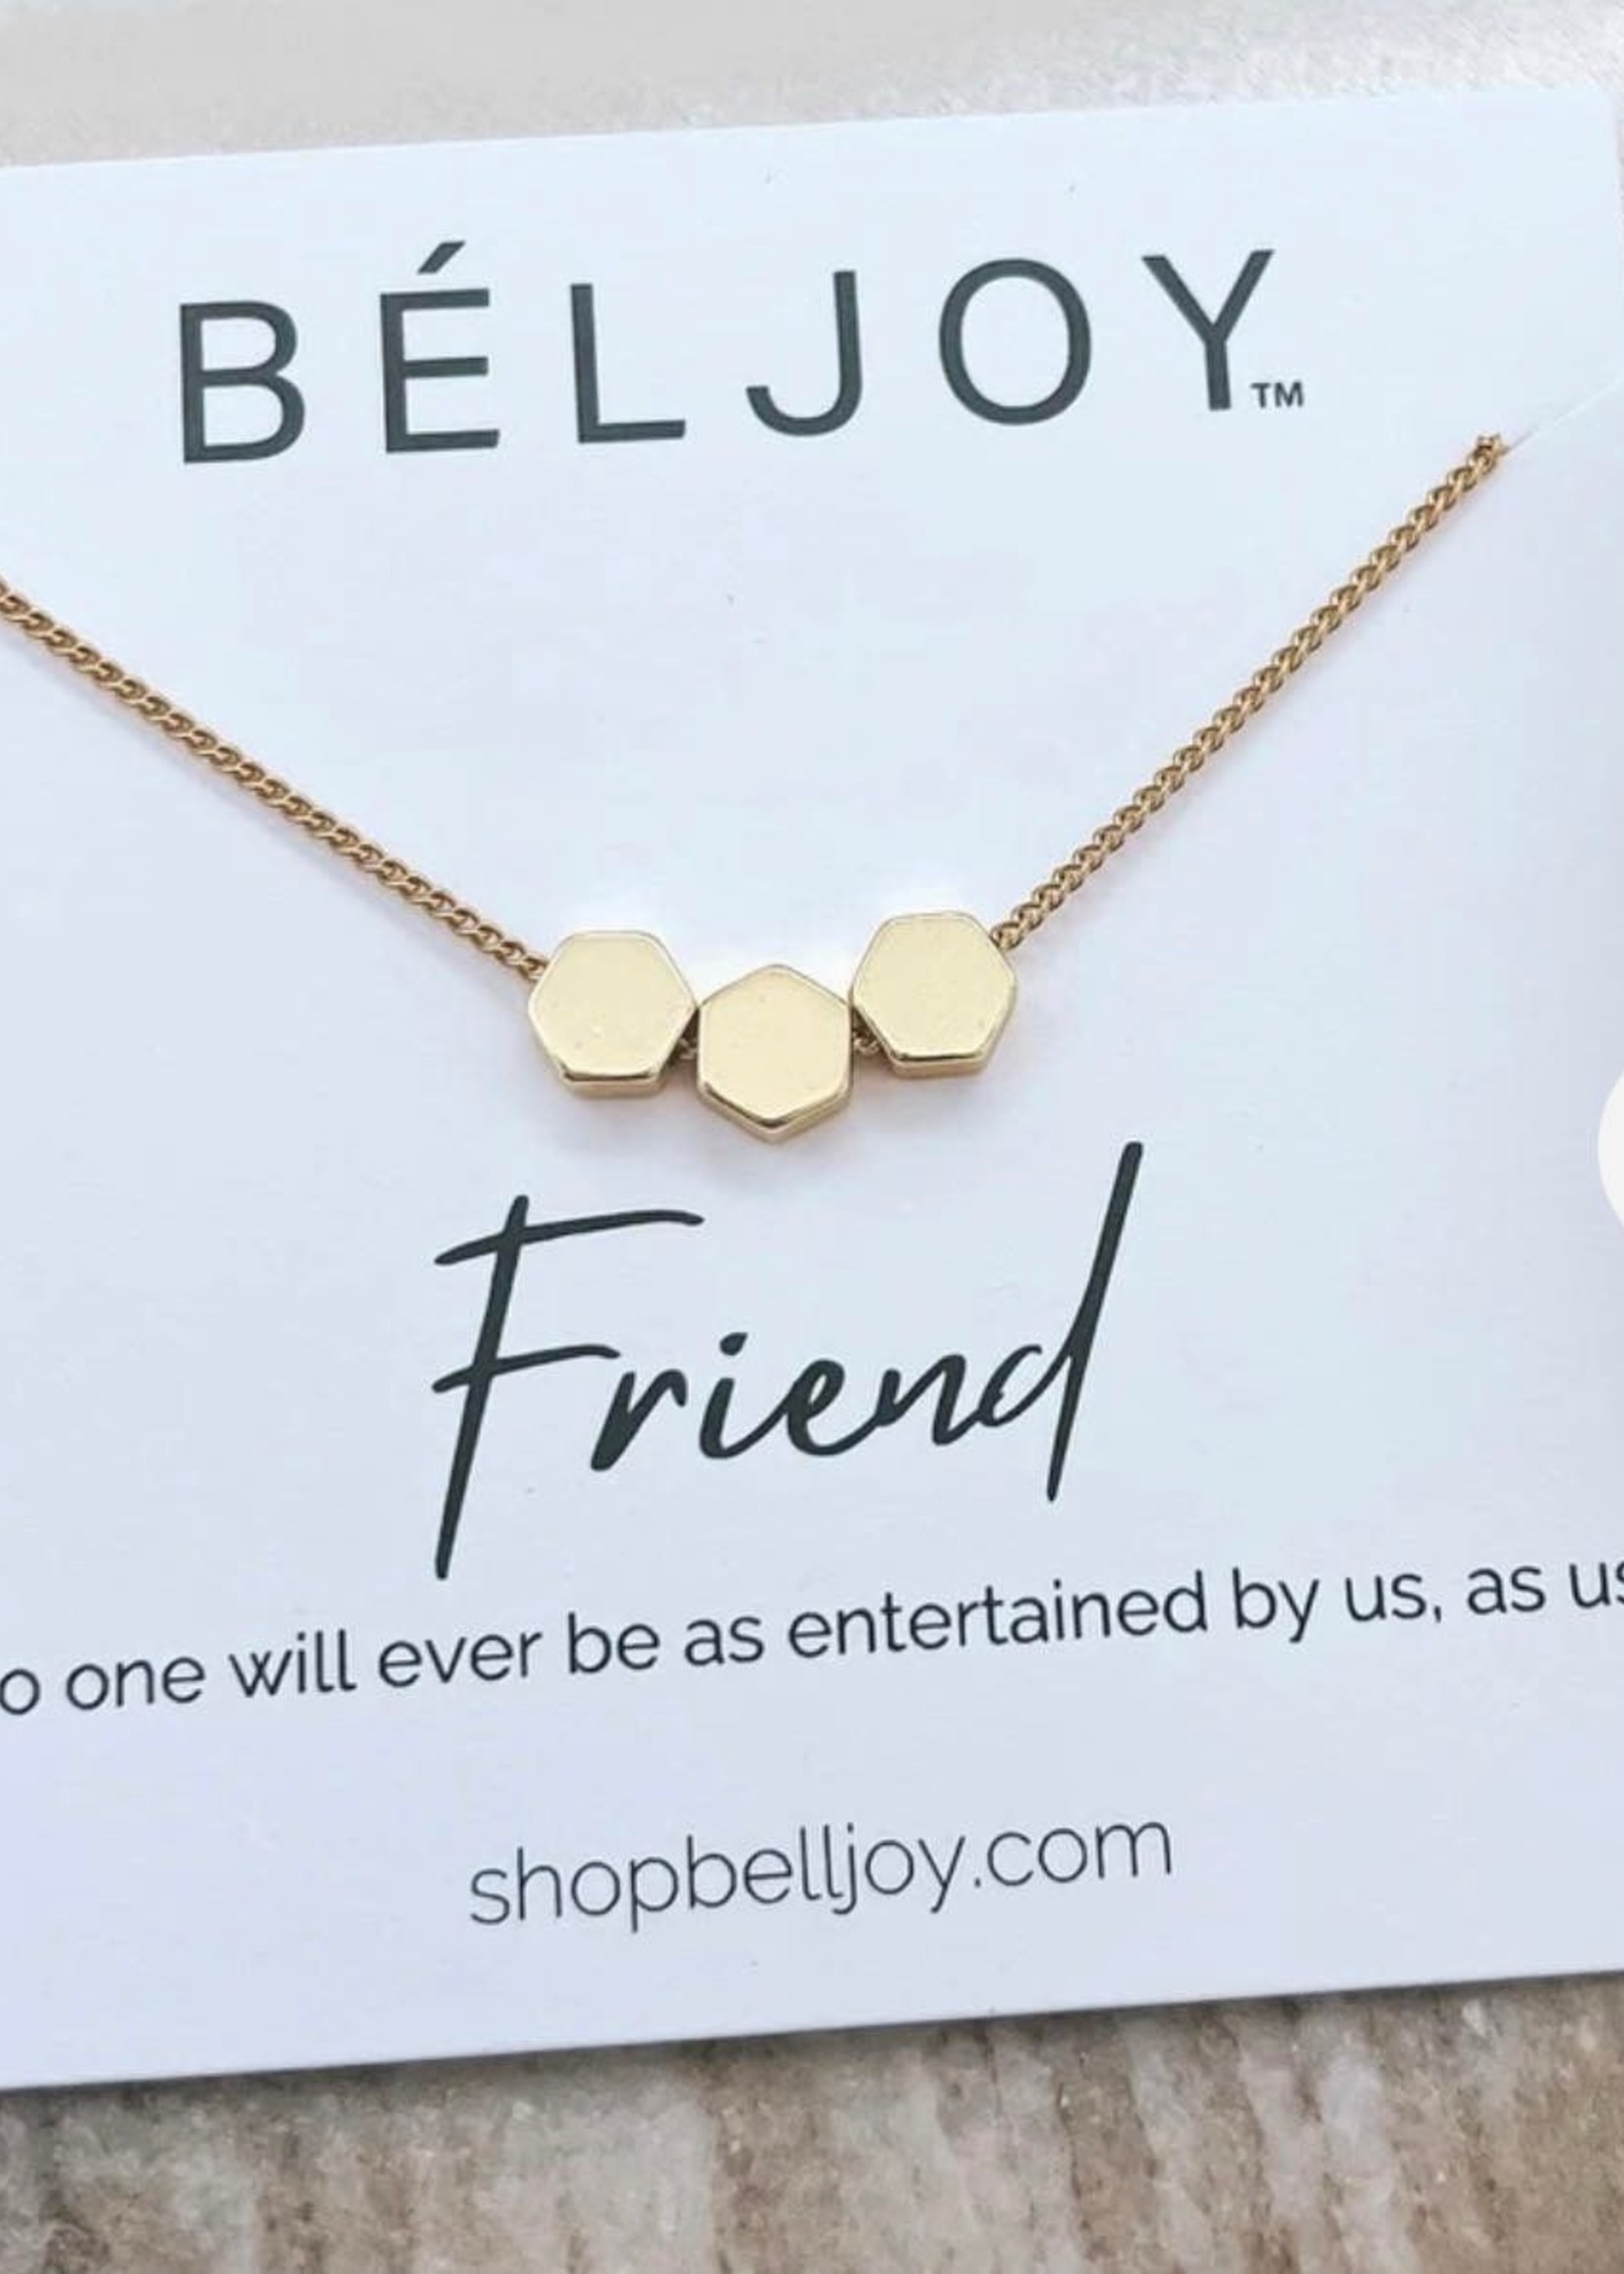 Beljoy Gift Collection - Several Options!